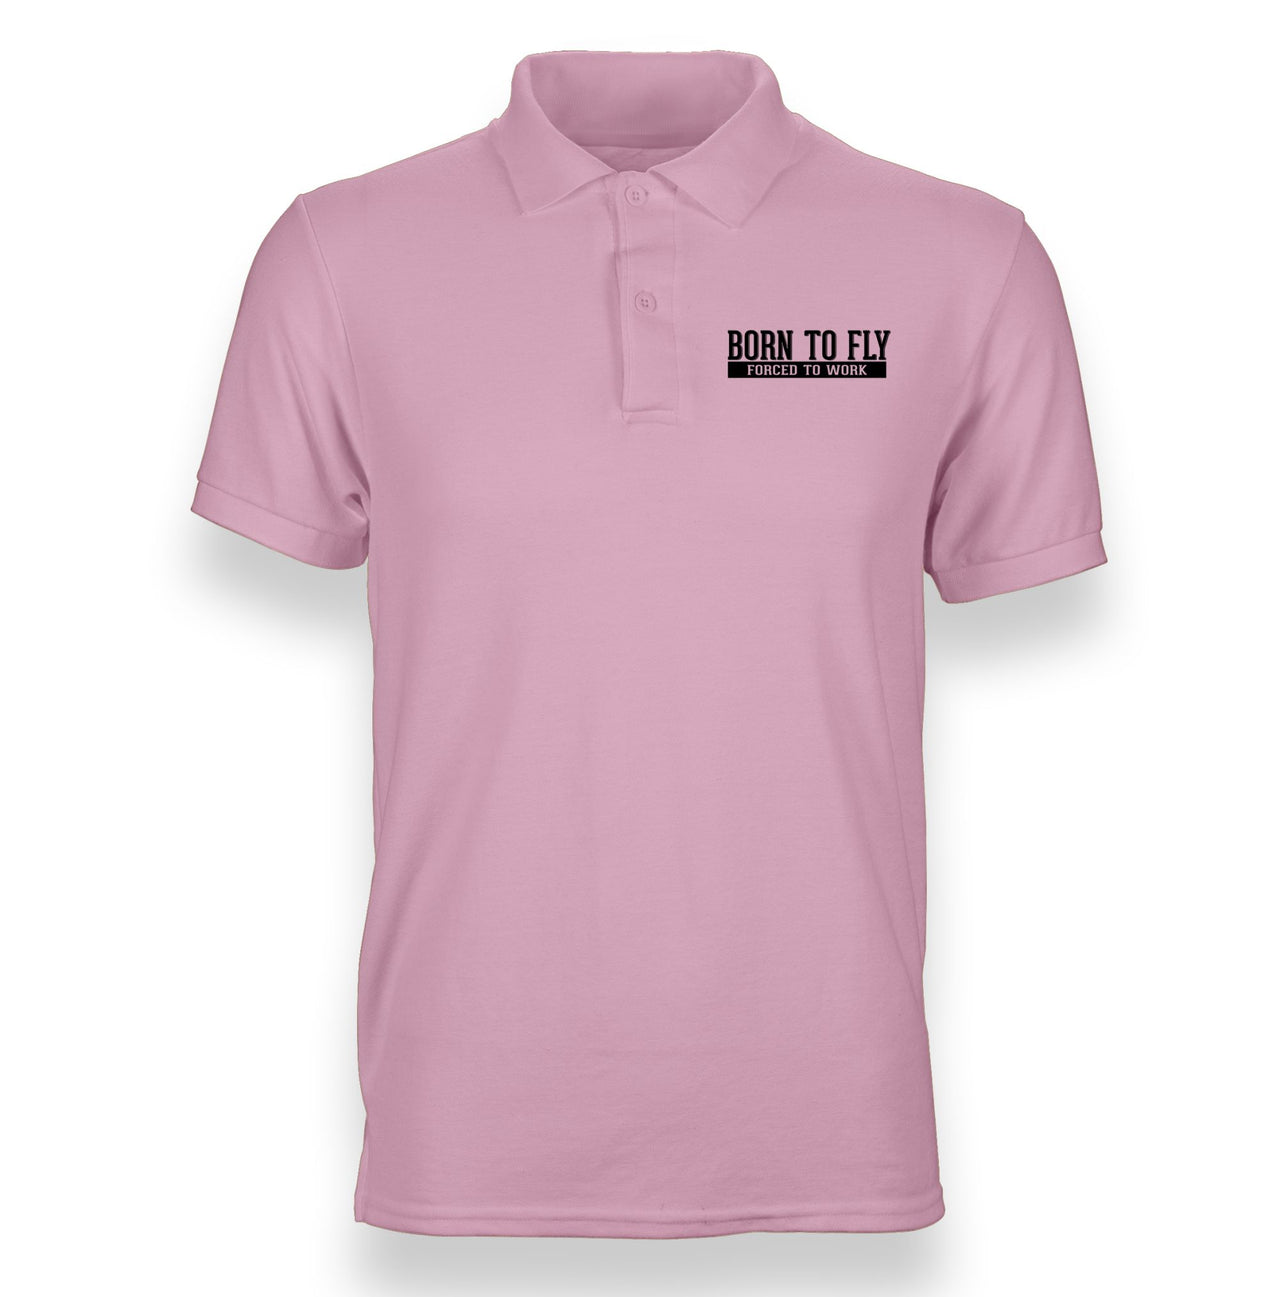 Born To Fly Forced To Work Designed "WOMEN" Polo T-Shirts